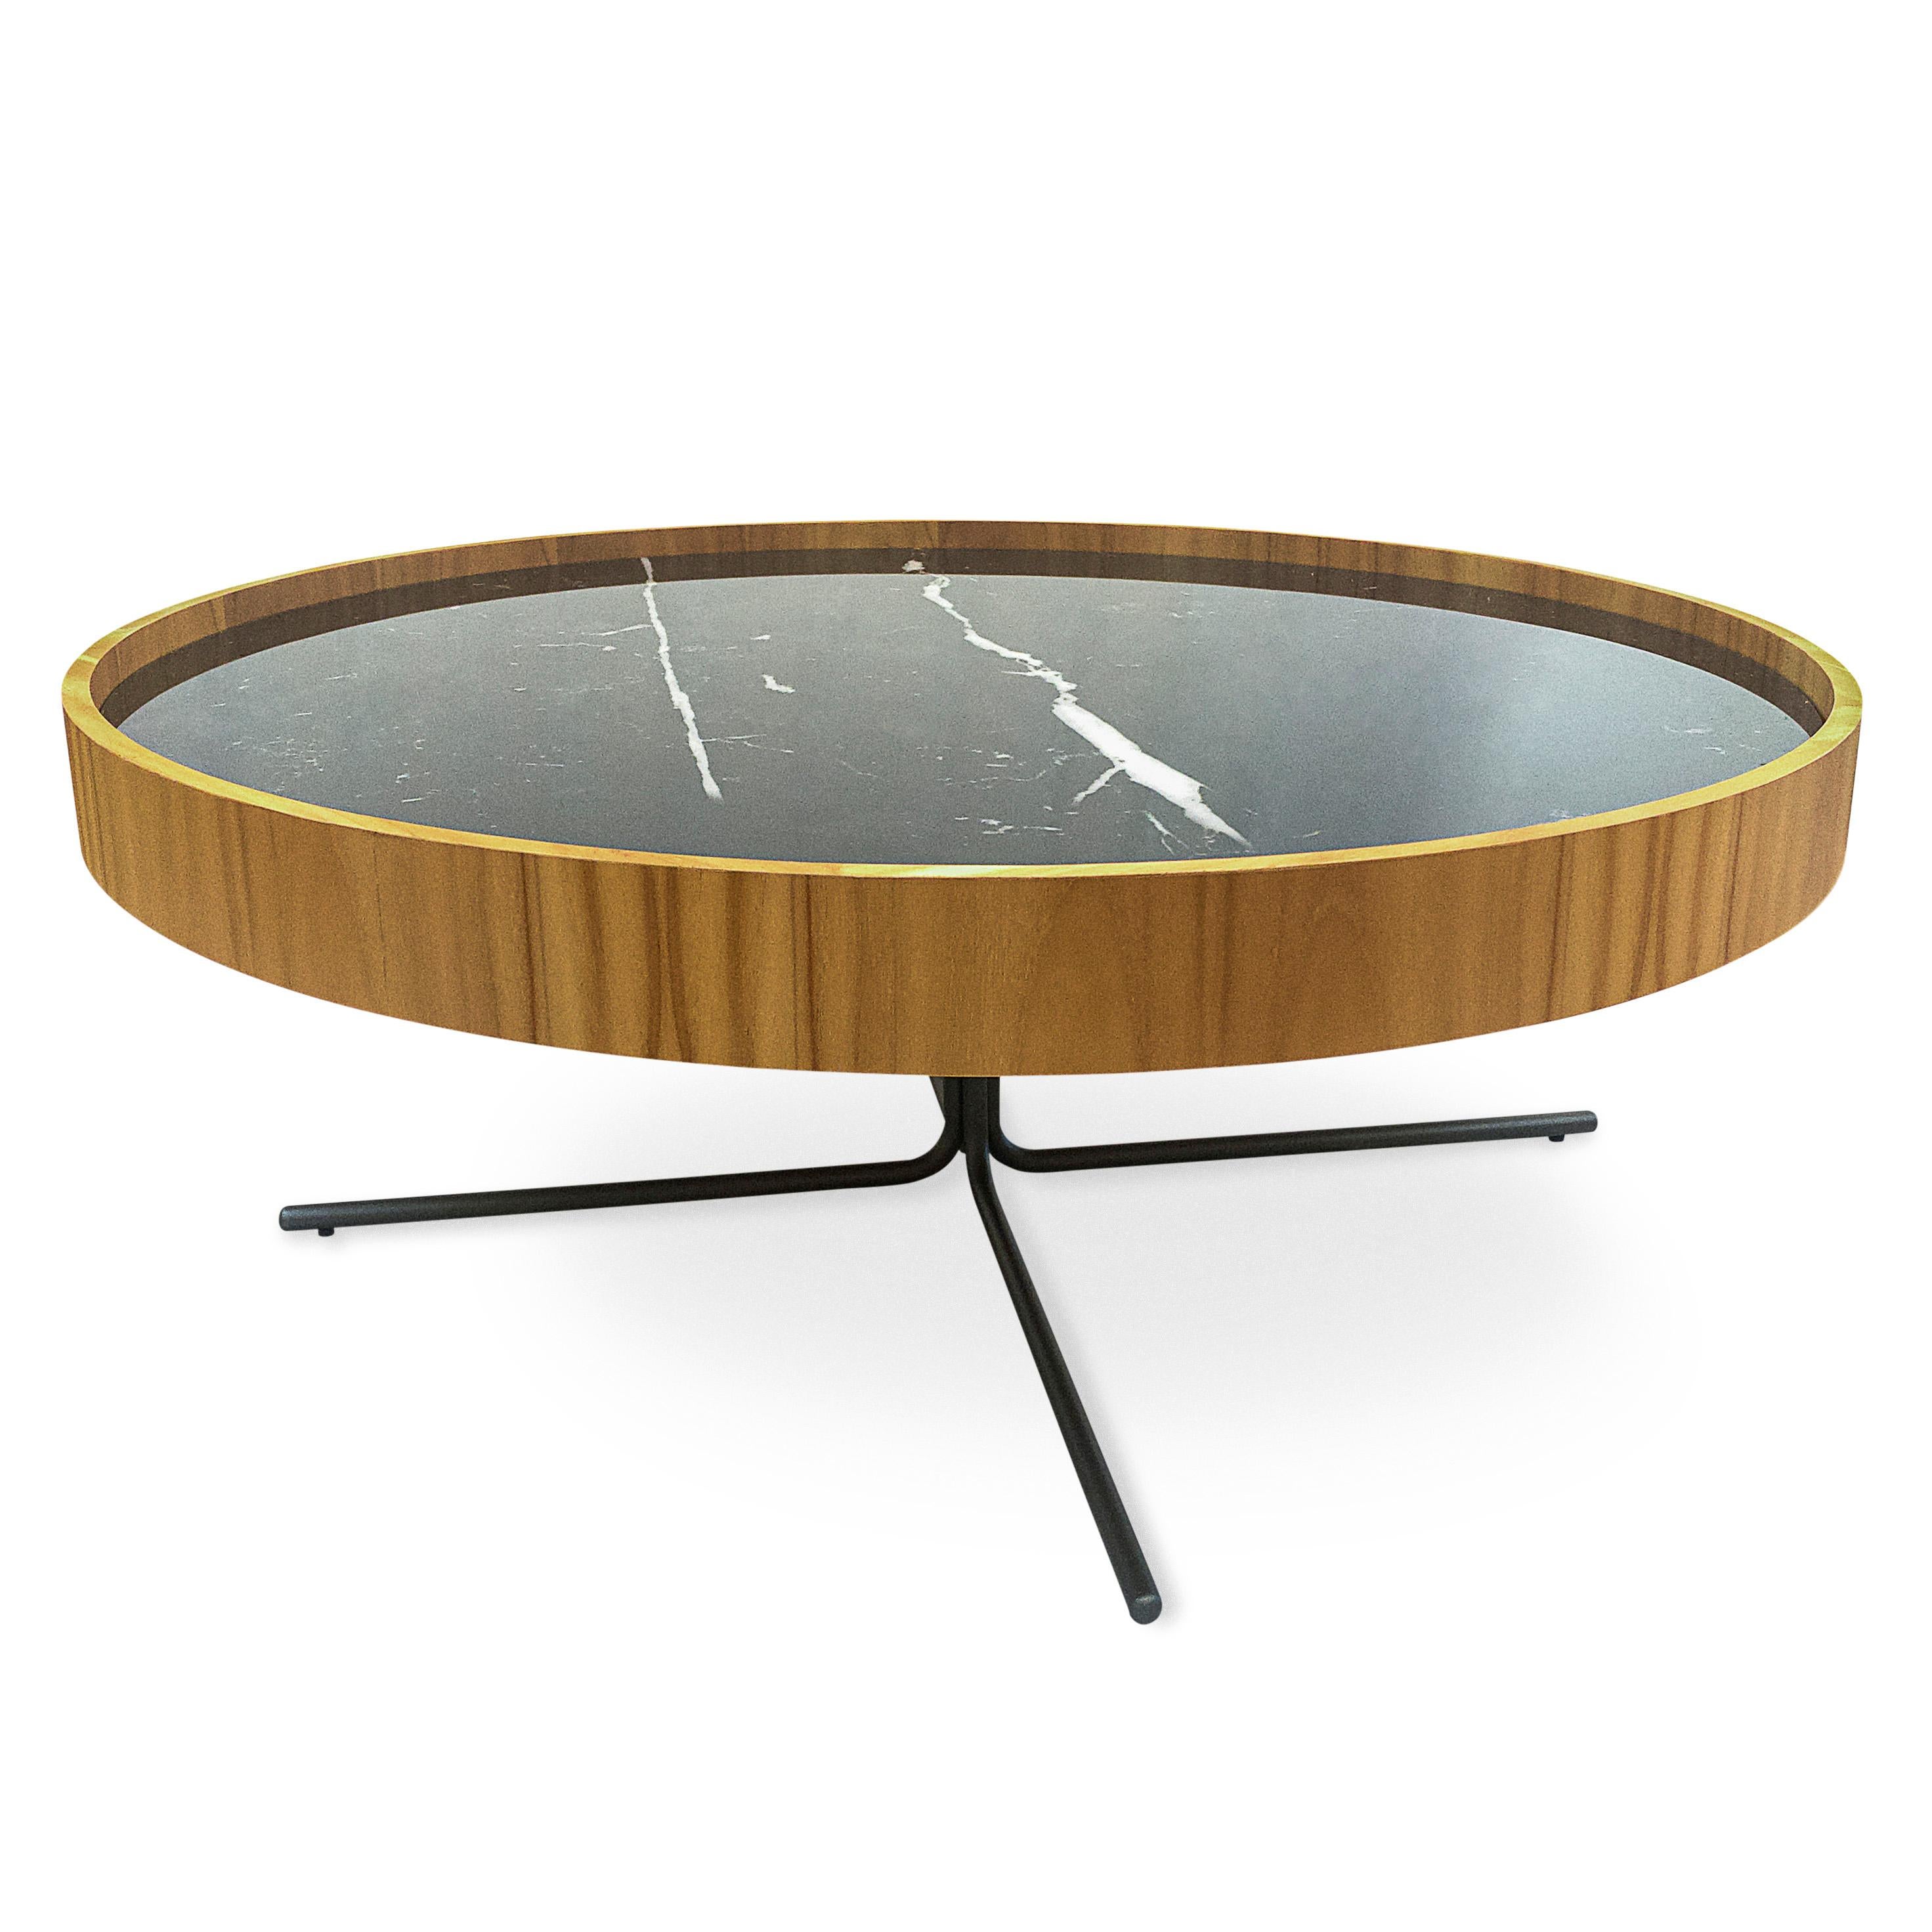 Brazilian Regia Occasional Table in Teak Wood Finish Featuring Black Nero Glass, Set of 2 For Sale